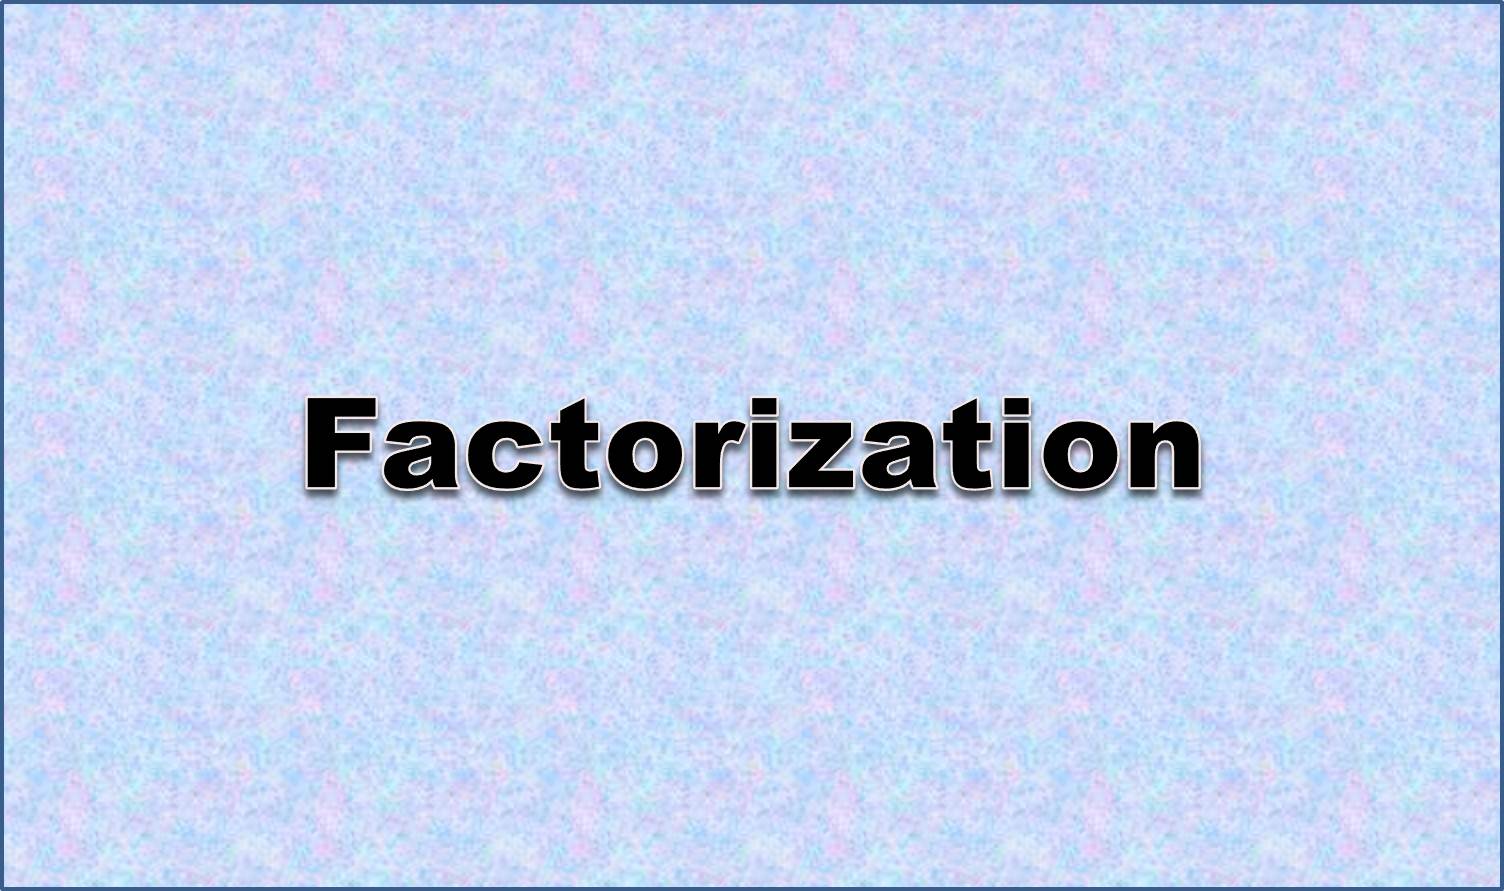 http://study.aisectonline.com/images/Factoring polynomials-common binomial factor.jpg